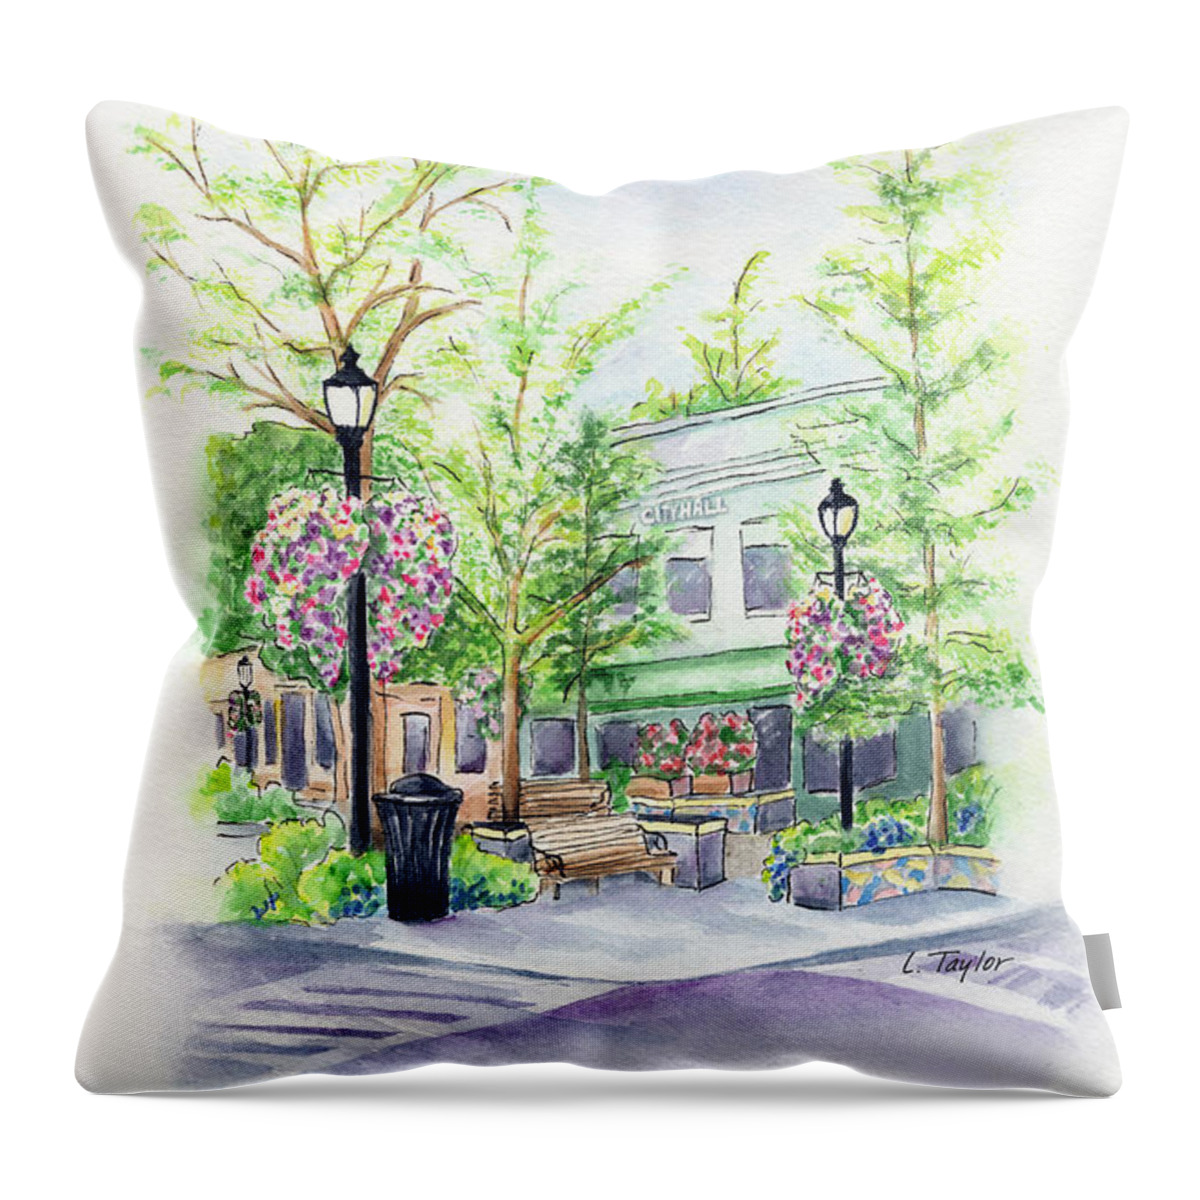 Small Town Throw Pillow featuring the painting Across the Plaza by Lori Taylor